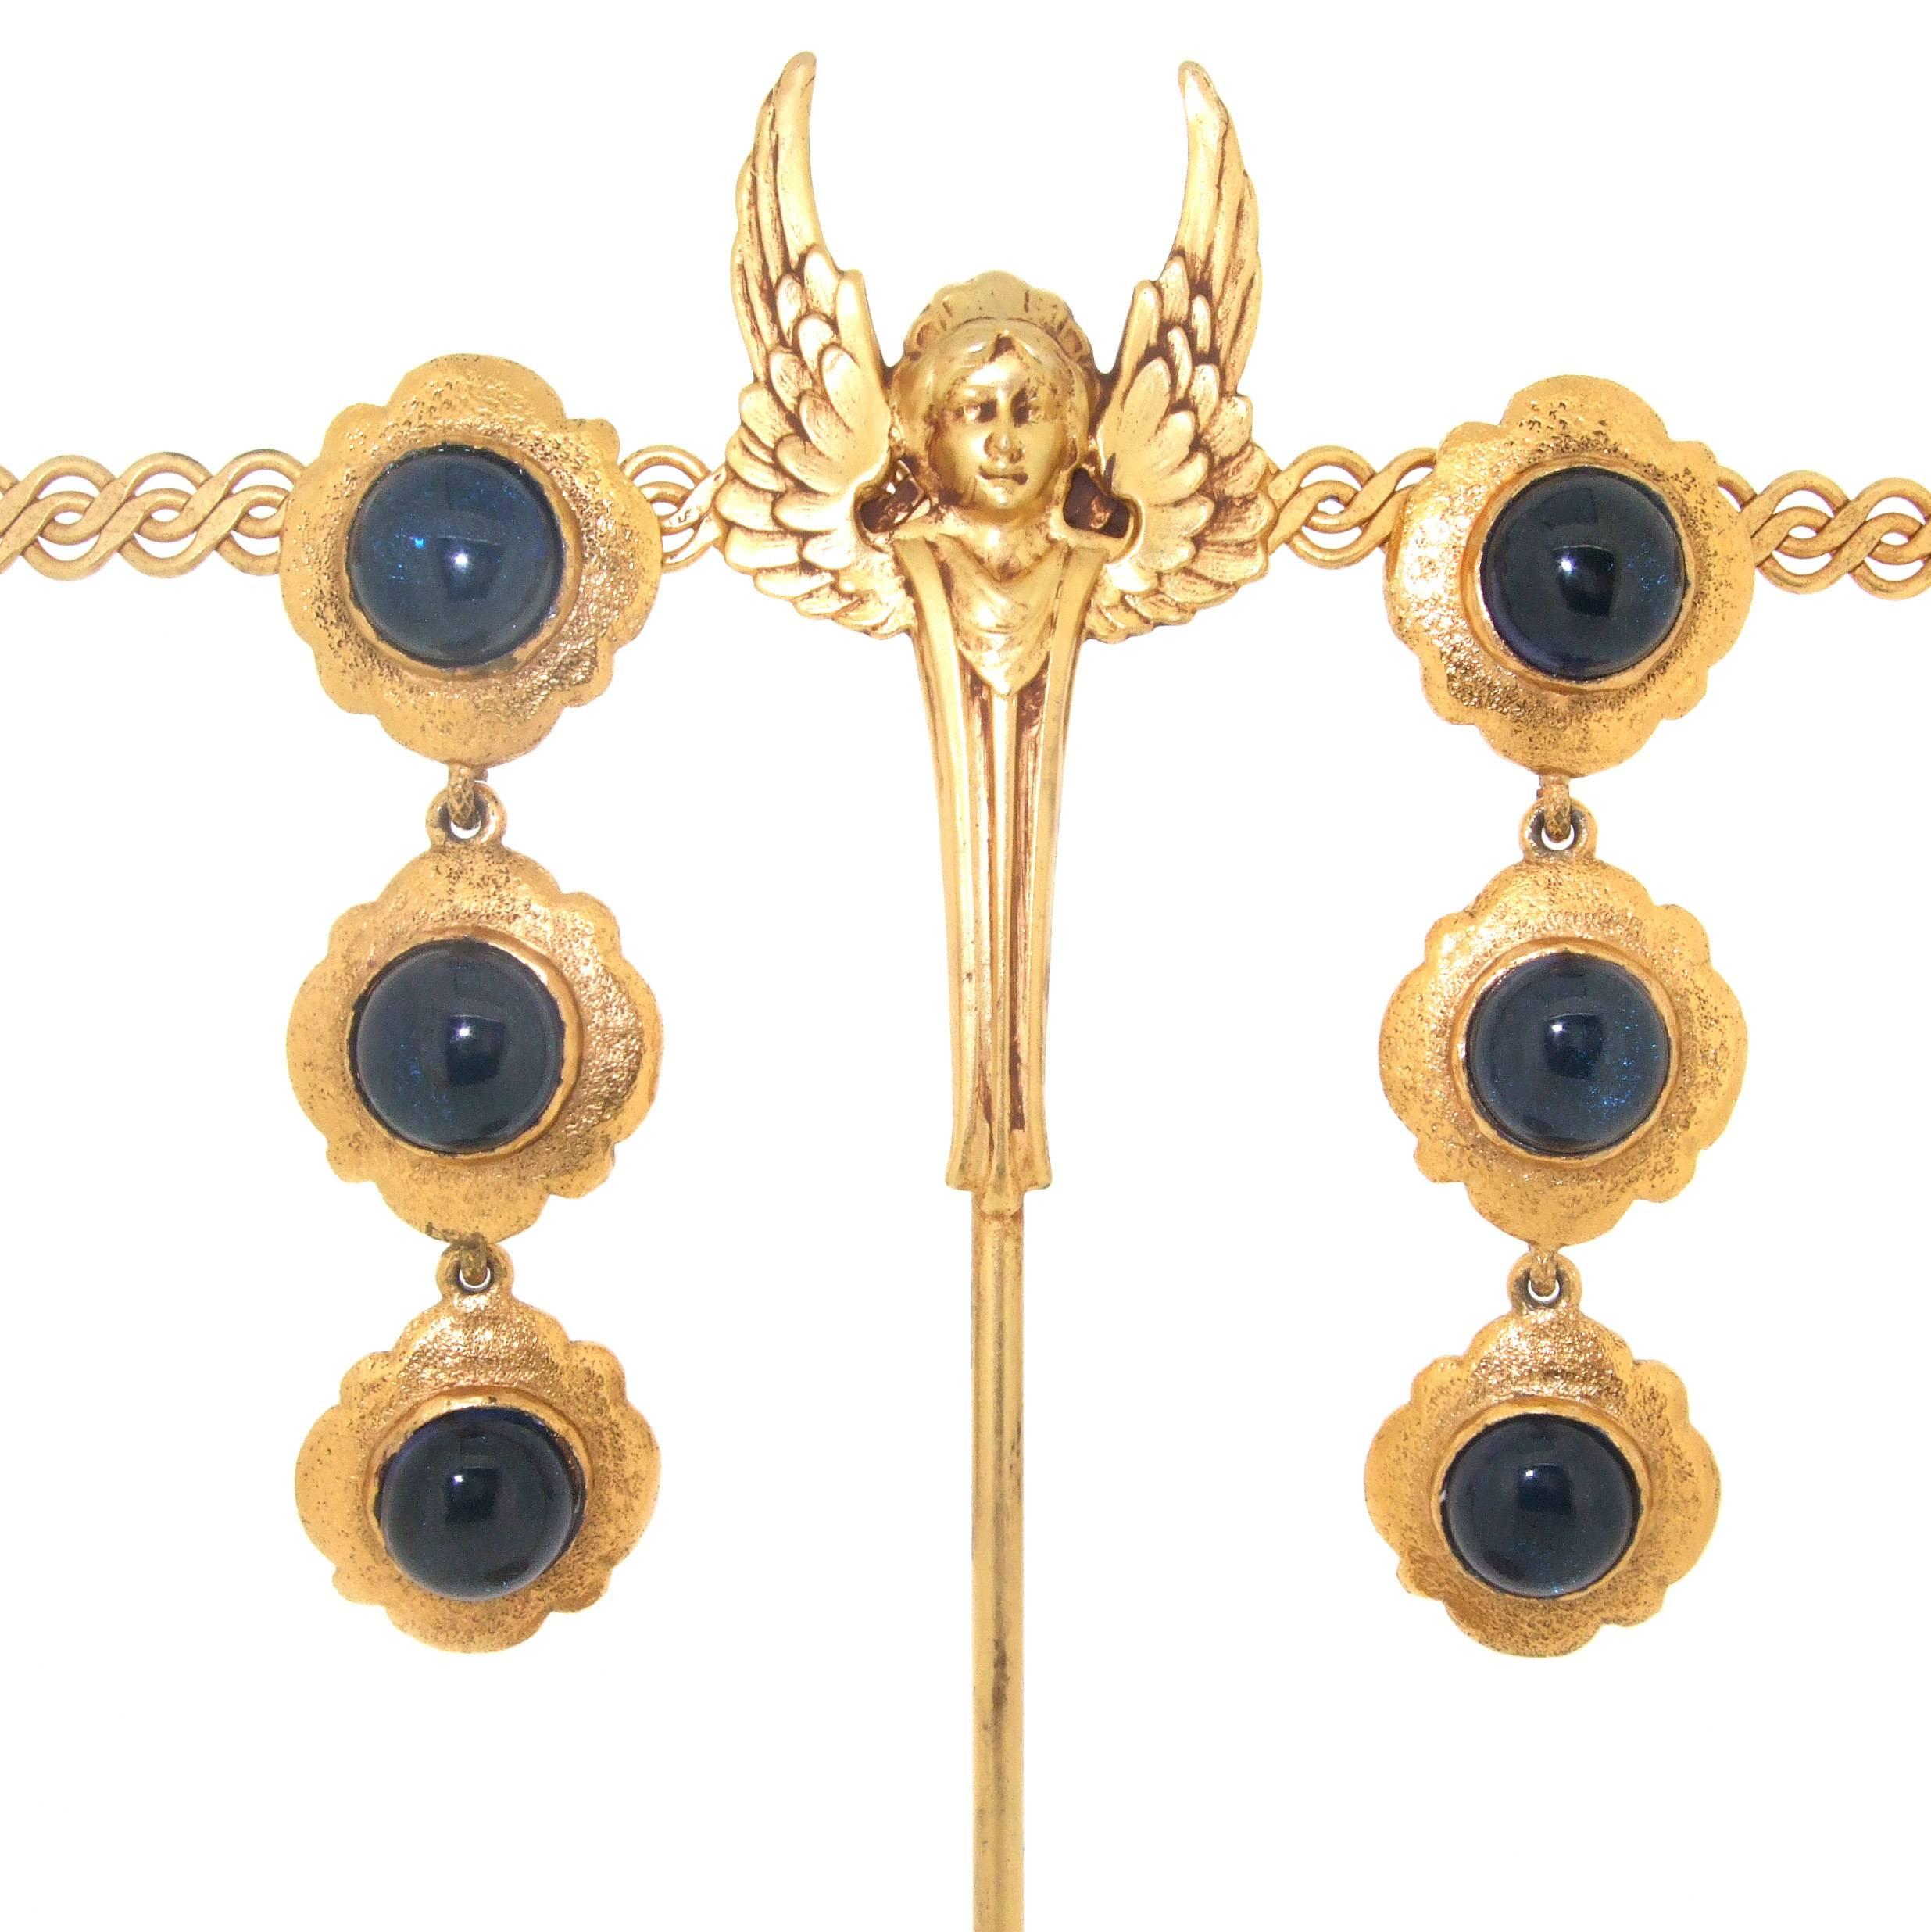 Baroque Revival Chanel Earrings in Sapphire Blue Glass For Sale